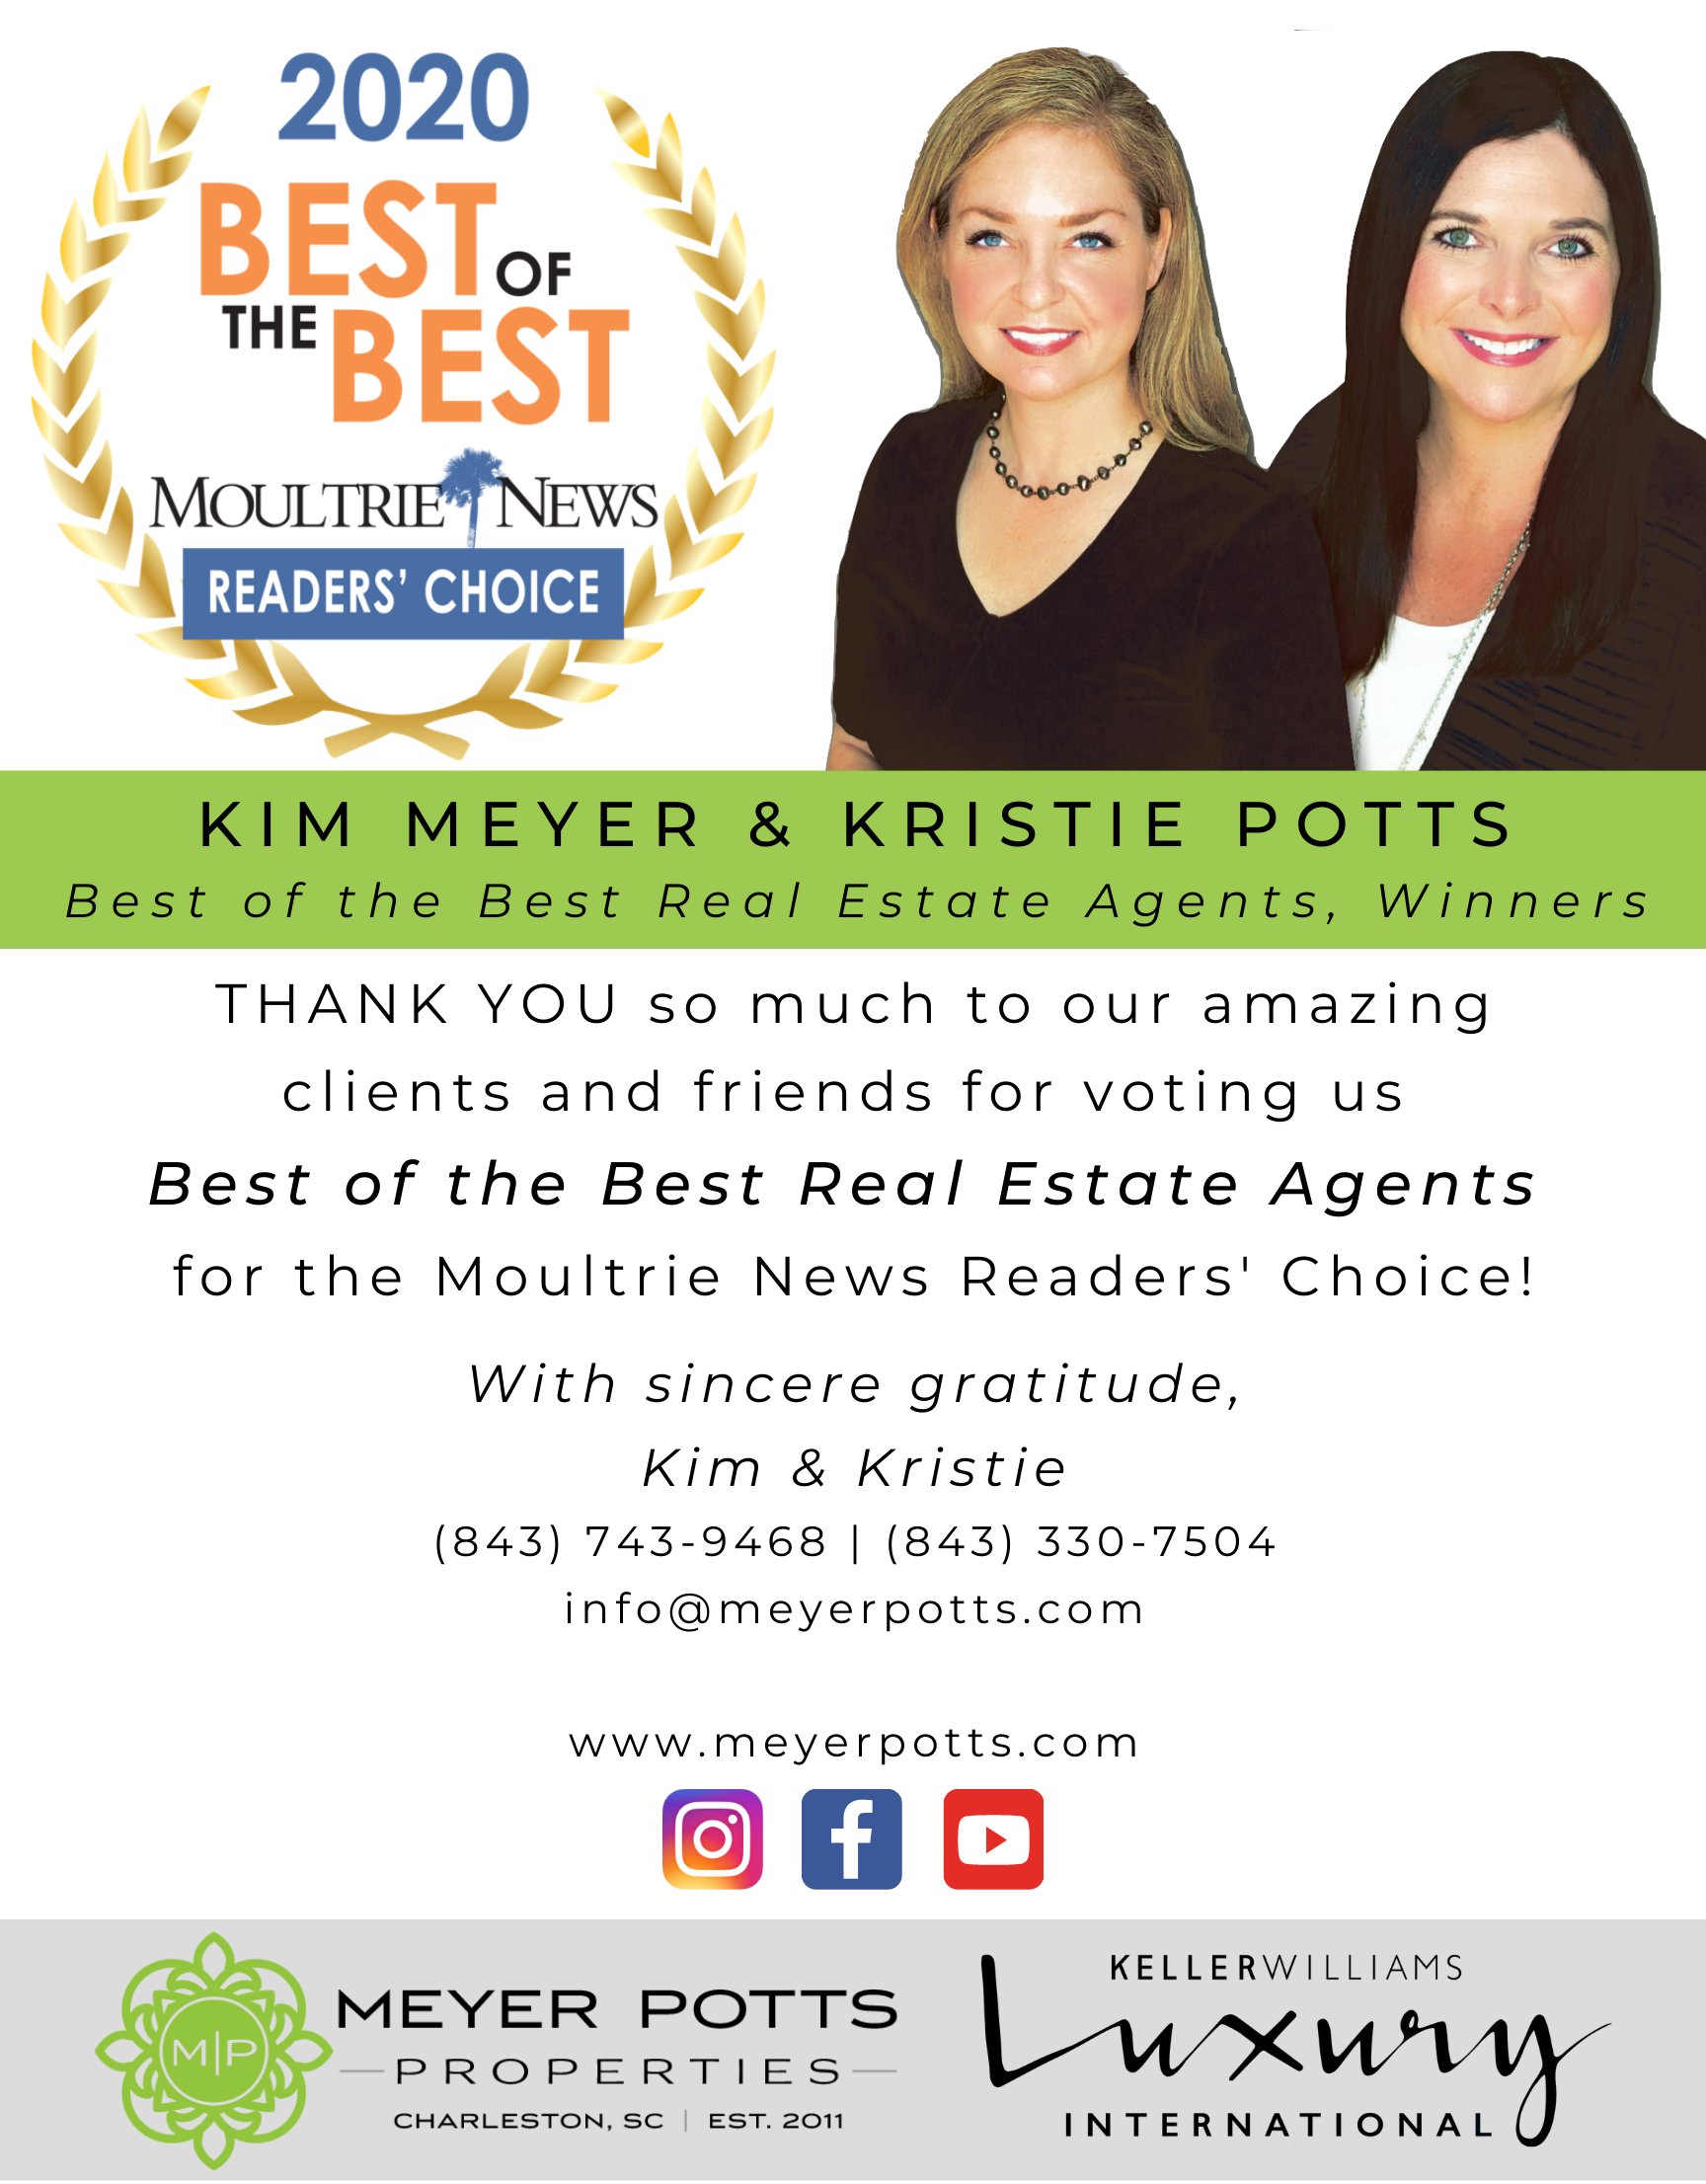 MOULTRIE NEWS READERS' CHOICE BEST OF THE BEST WINNERS